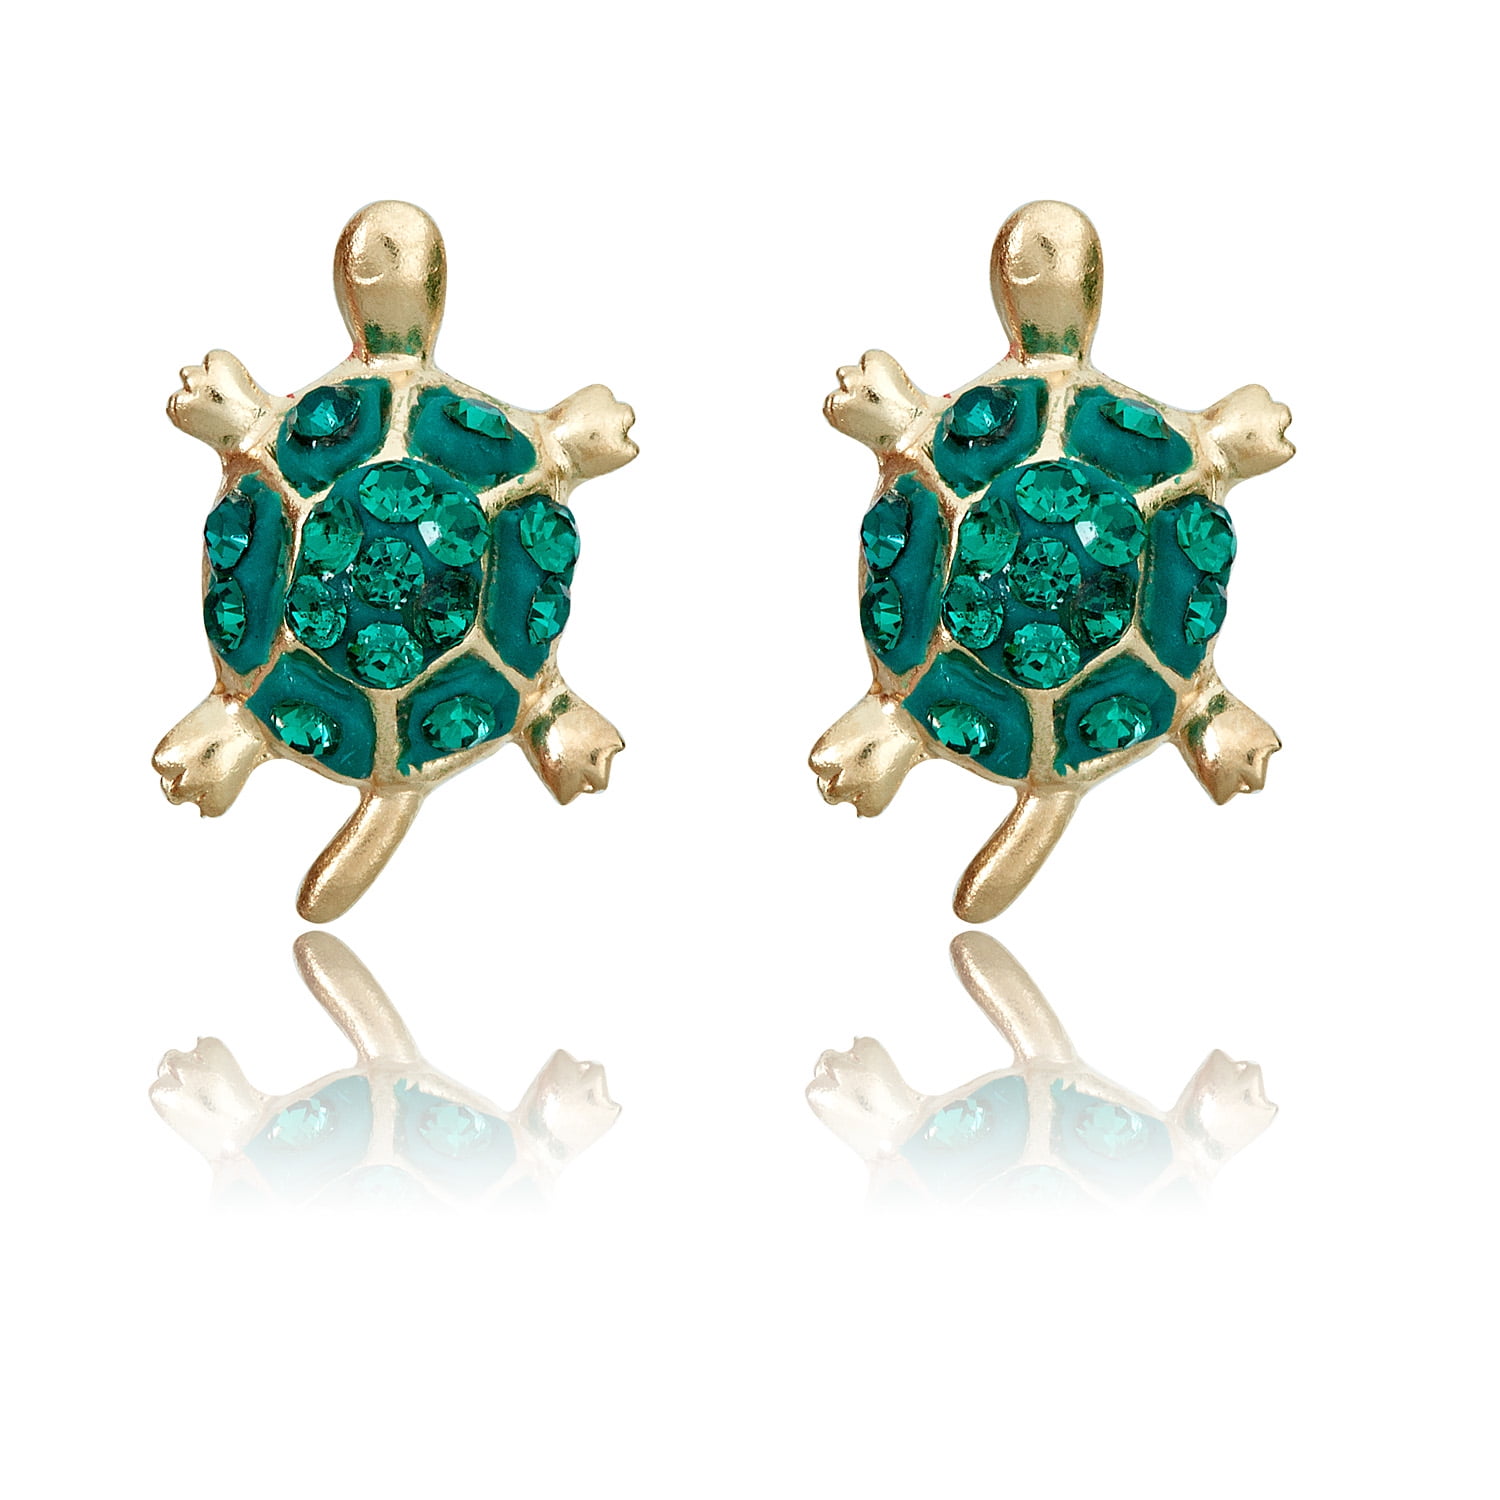 Solid 14k Yellow Gold Green Enameled Turtle Post Earrings 12mm x 9mm